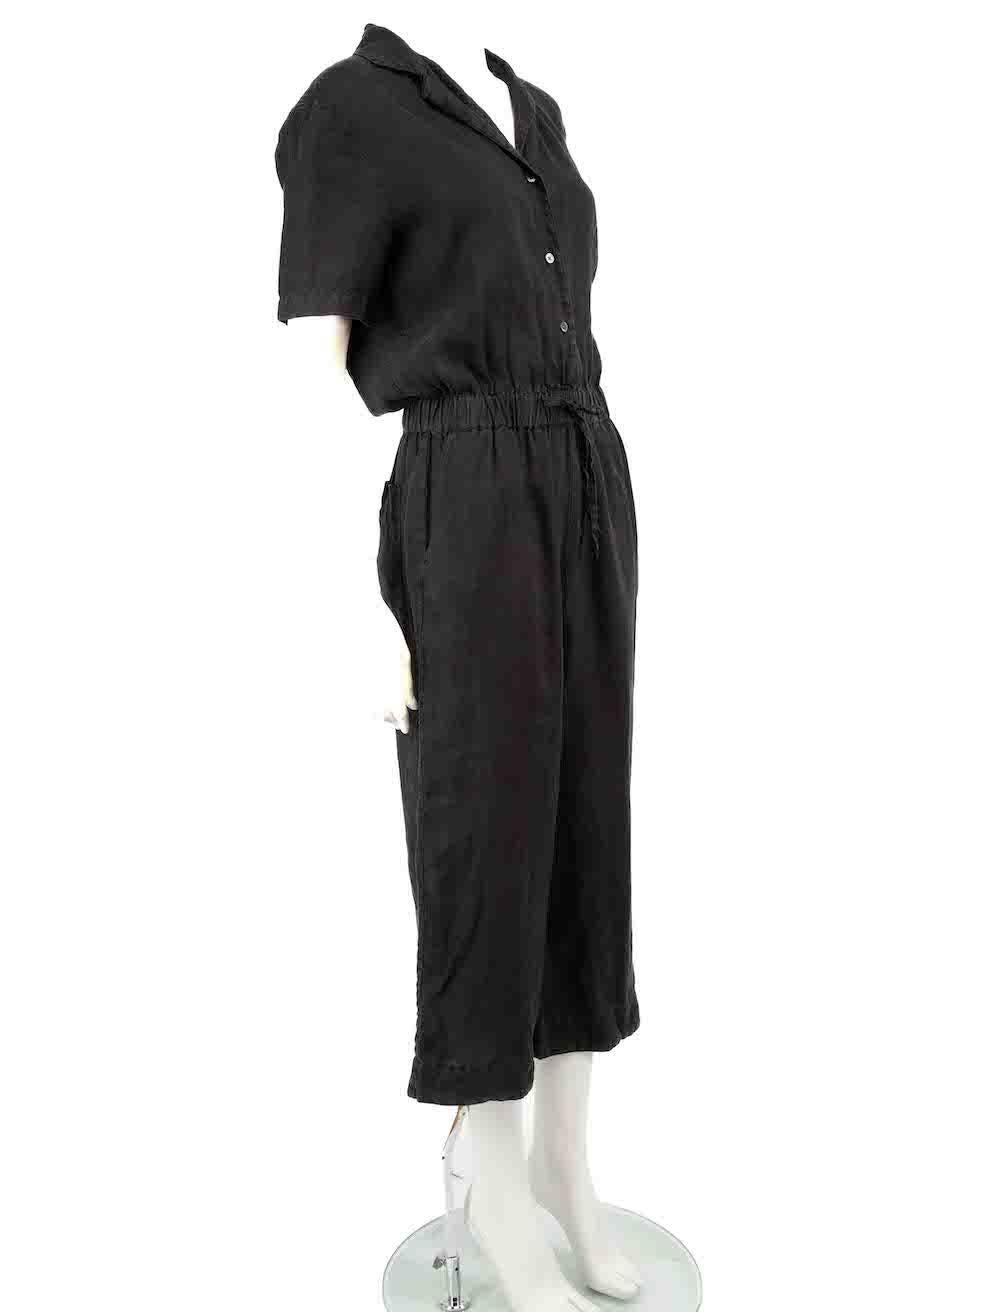 CONDITION is Very good. Minimal wear to jumpsuit is evident. Minimal wear to the overall colour with light fading to the fabric on this used James Perse designer resale item.
 
 
 
 Details
 
 
 Black
 
 Linen
 
 Jumpsuit
 
 Short sleeves
 
 Front